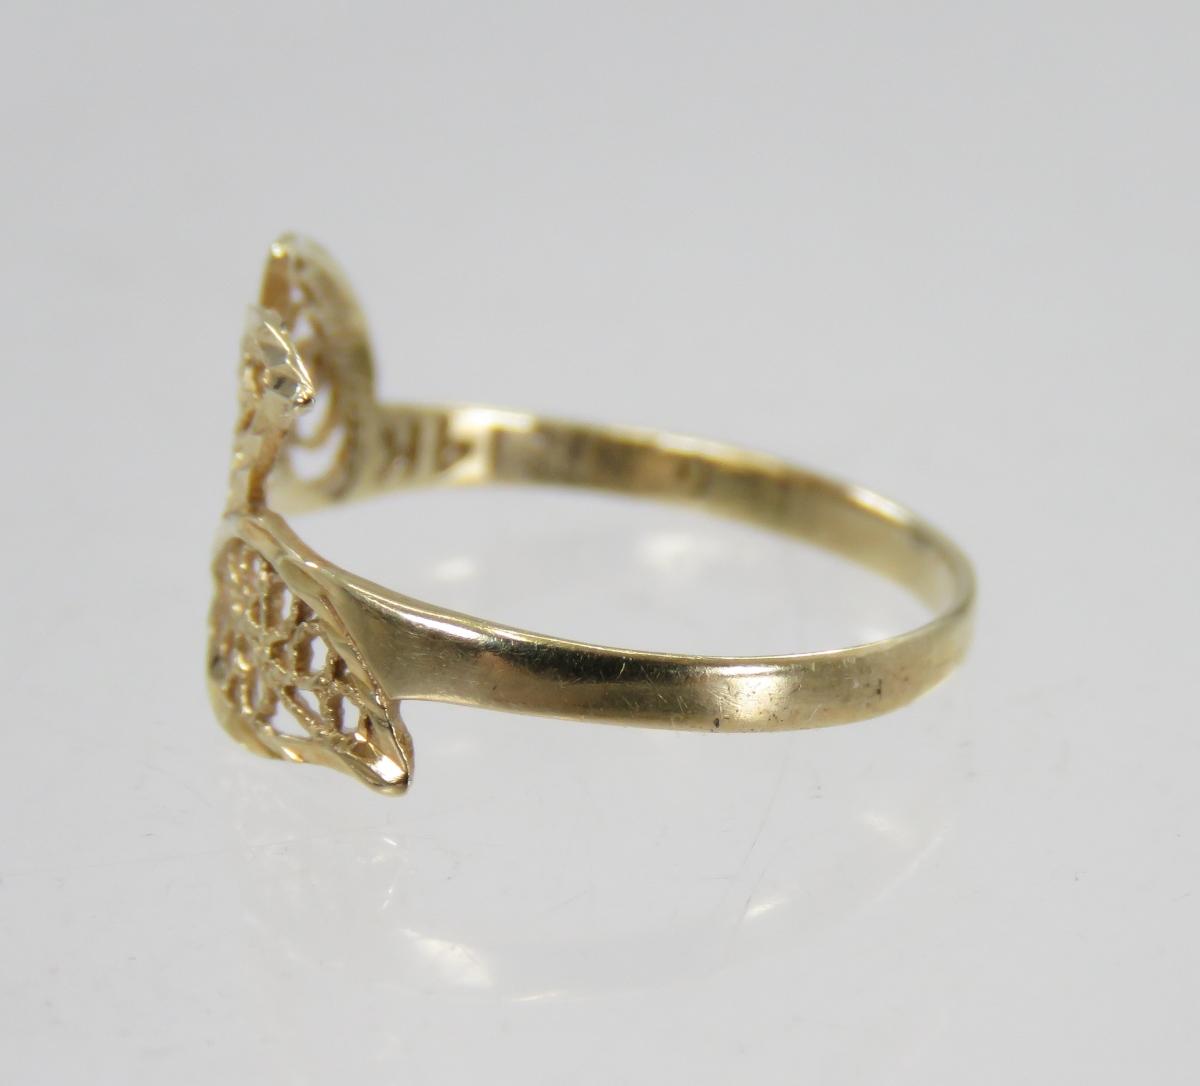 14kt Yellow Gold Filigree Earrings and Ring